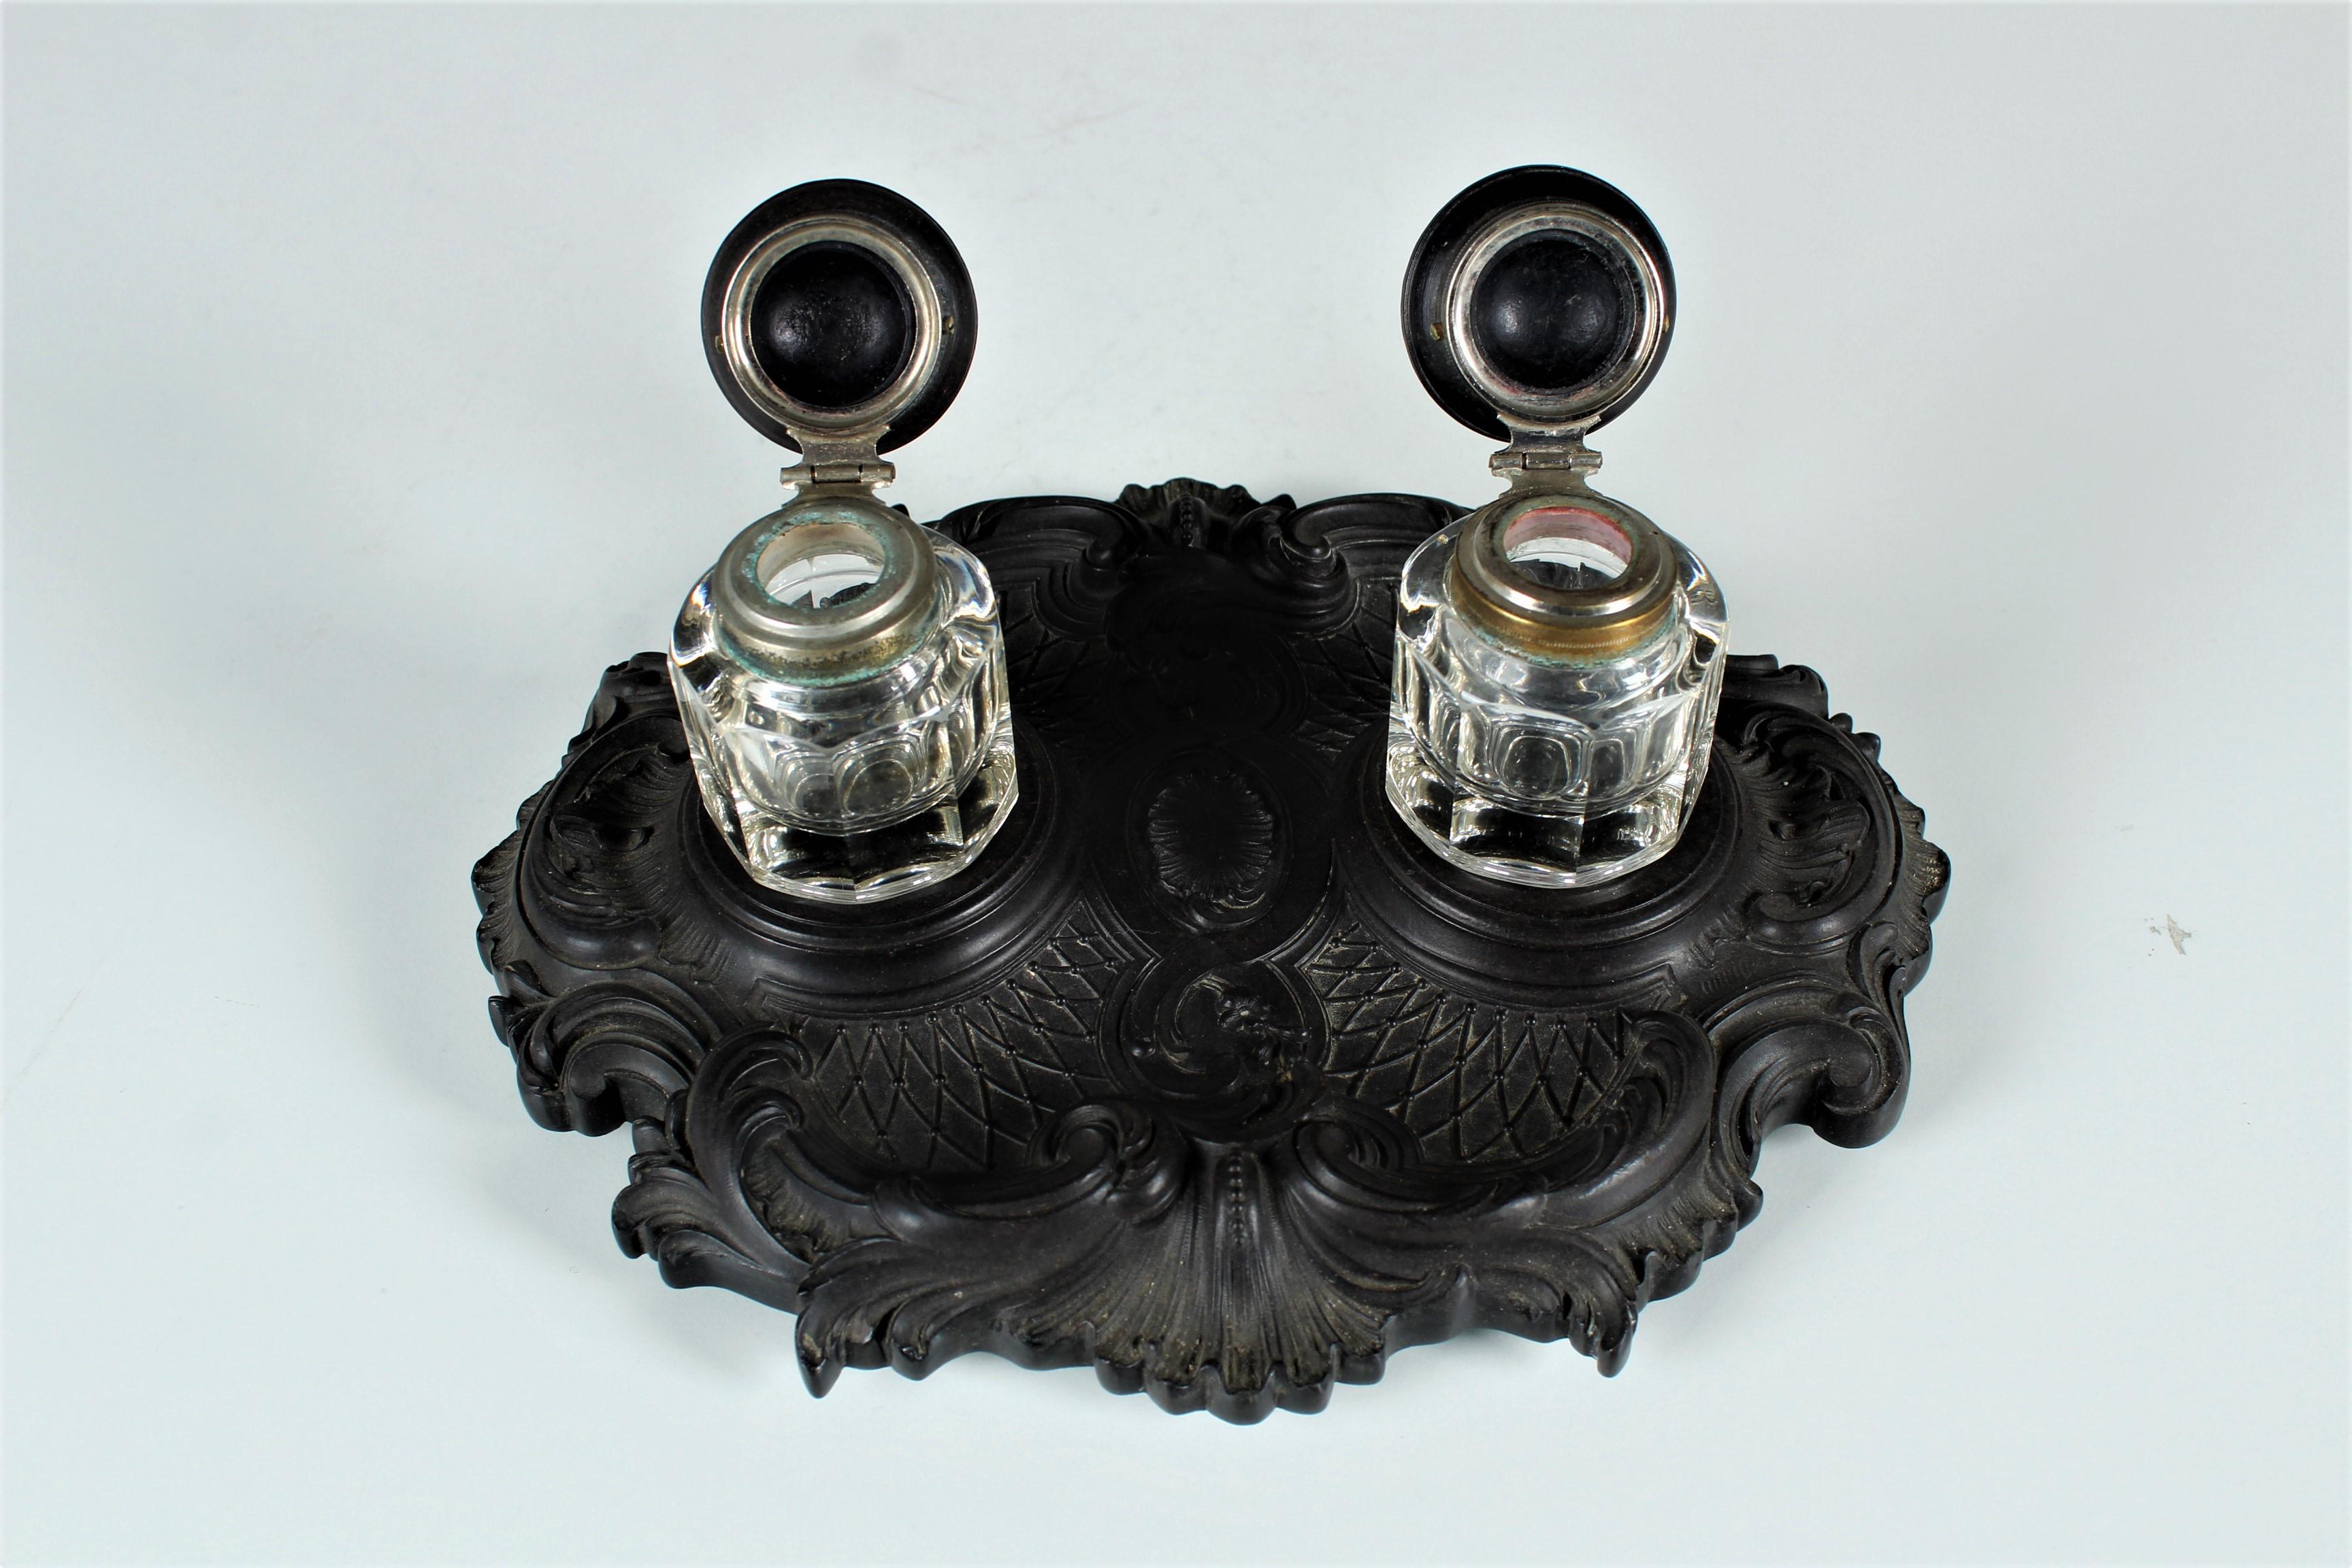 Beautiful antique inkstand with two crystal inkwells.
The base and the lids are made of gutta-percha, a molded resin, France, circa 1880.
The lids feature brass hinged collars.
A classic design covers the flat base.
Similar inkwells can be found in